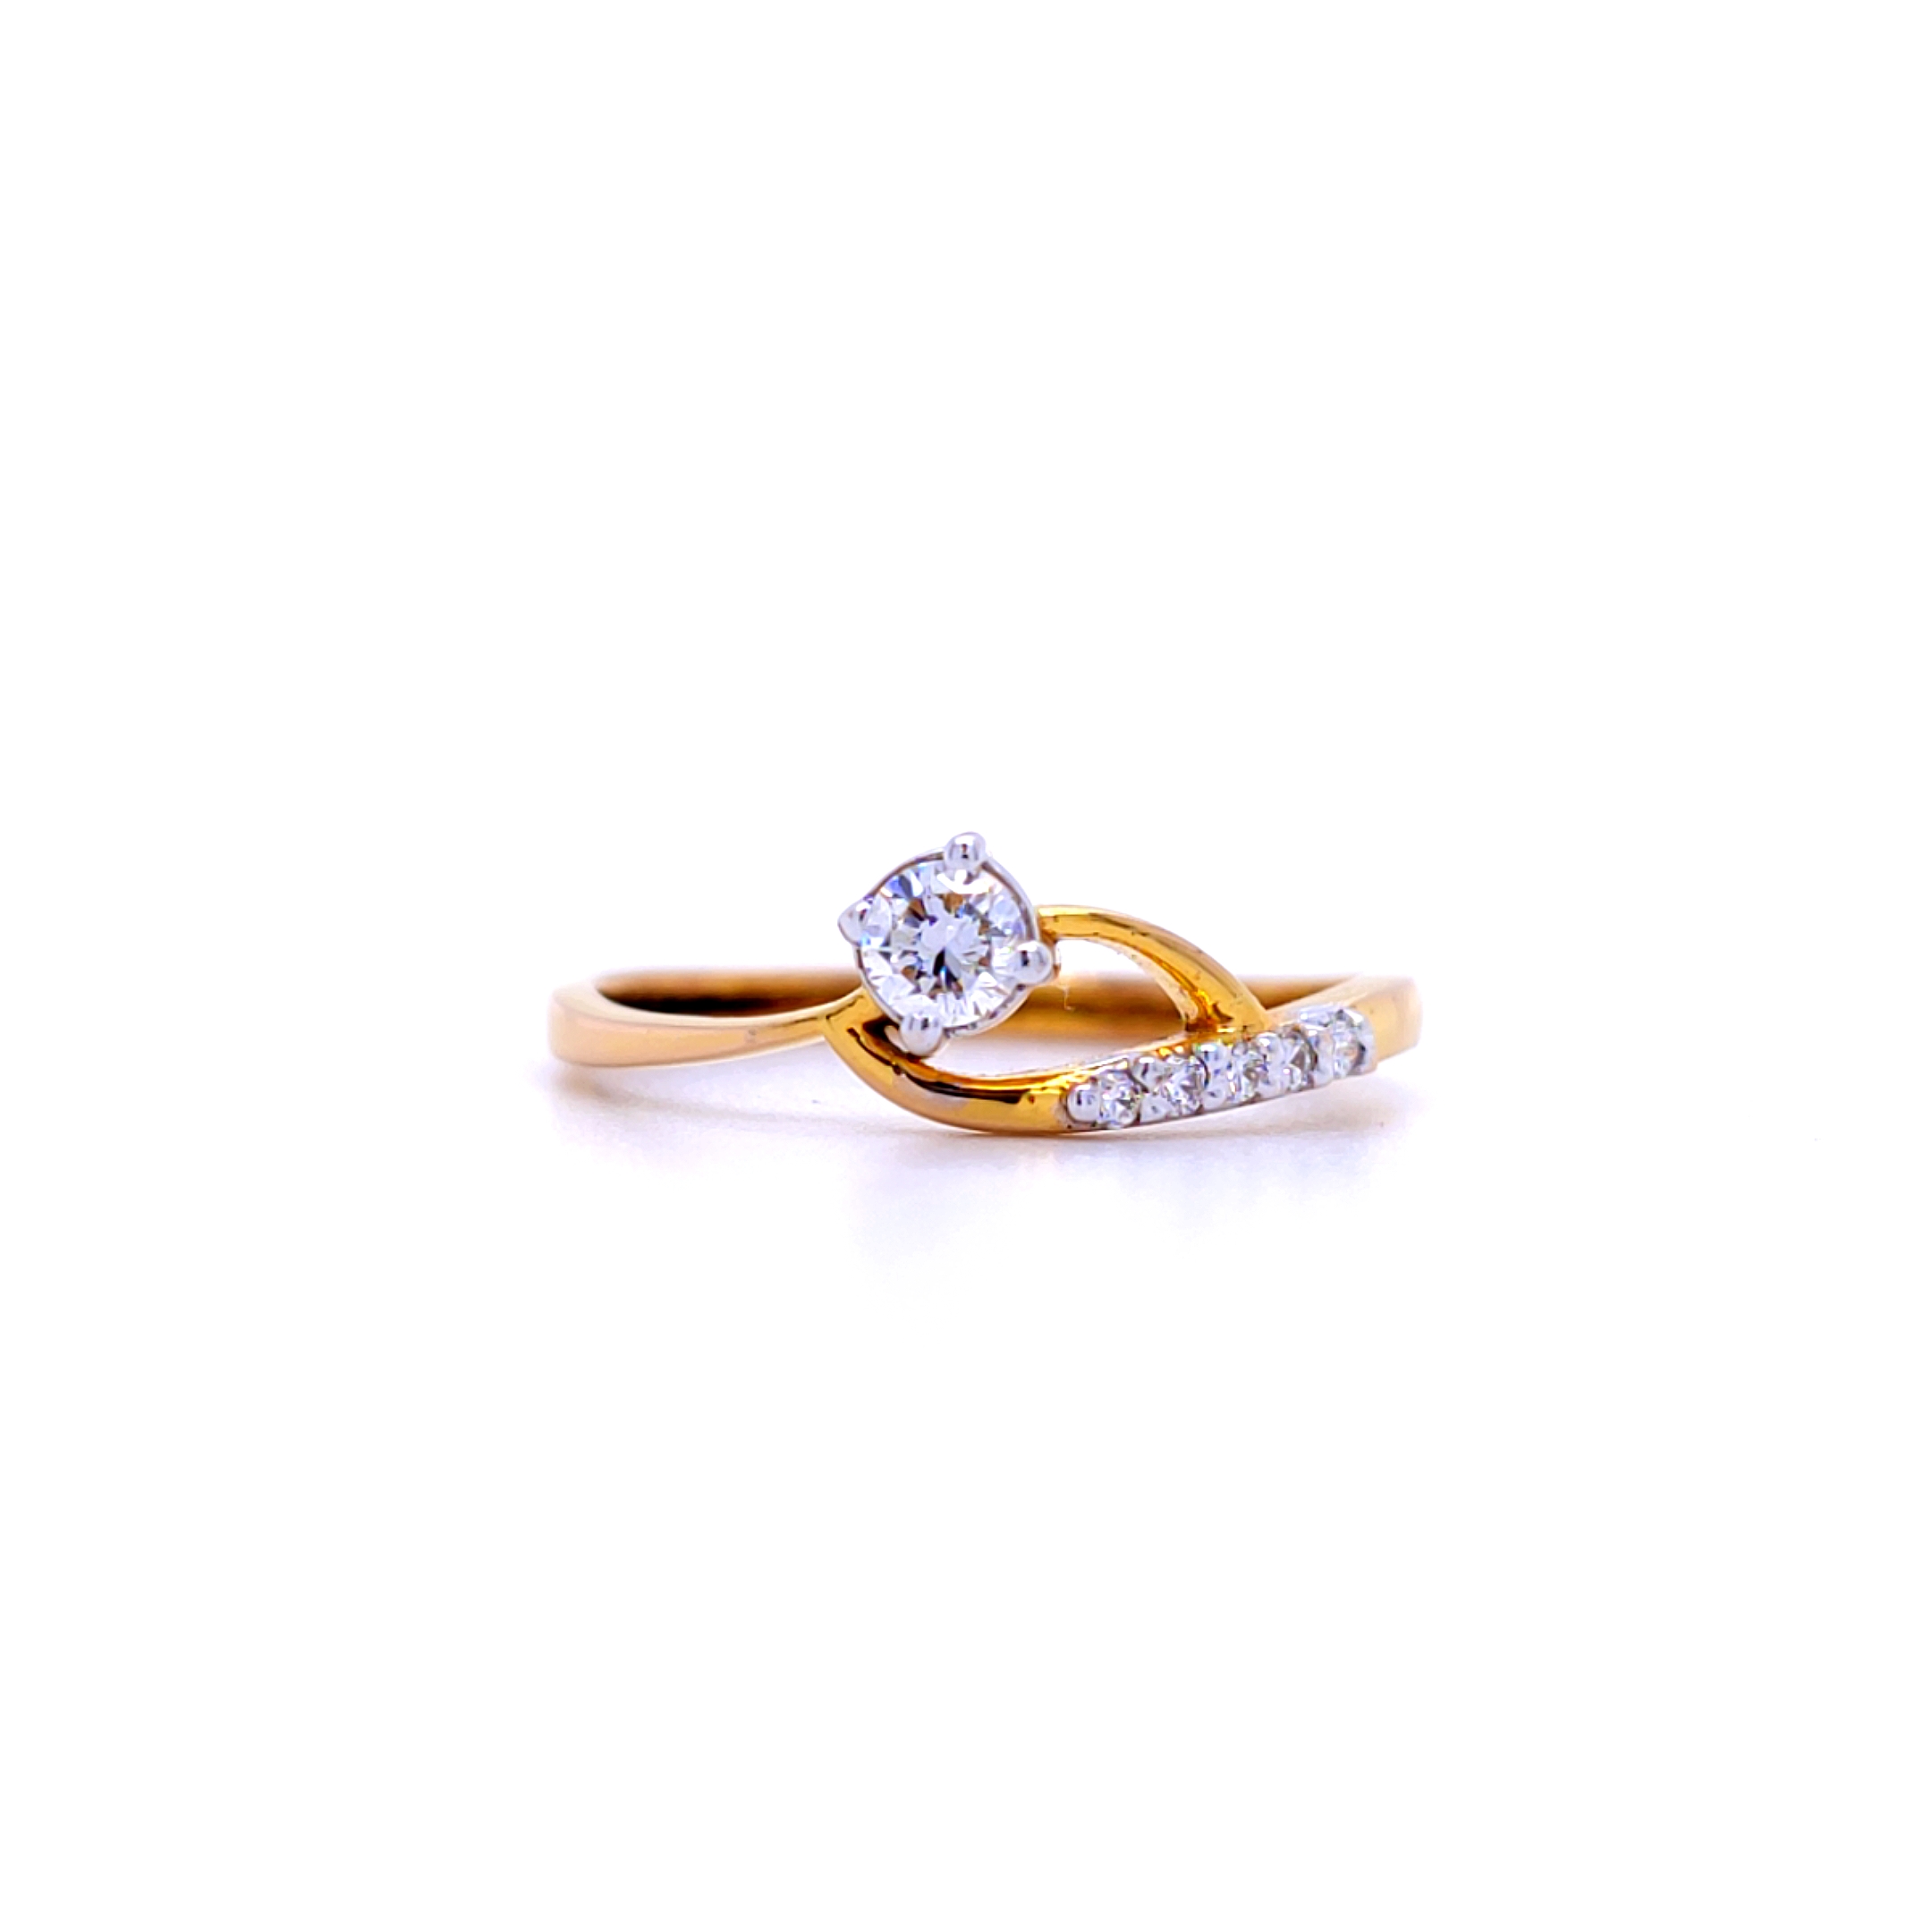 Solitaire look ladies dimond ring for all occasion